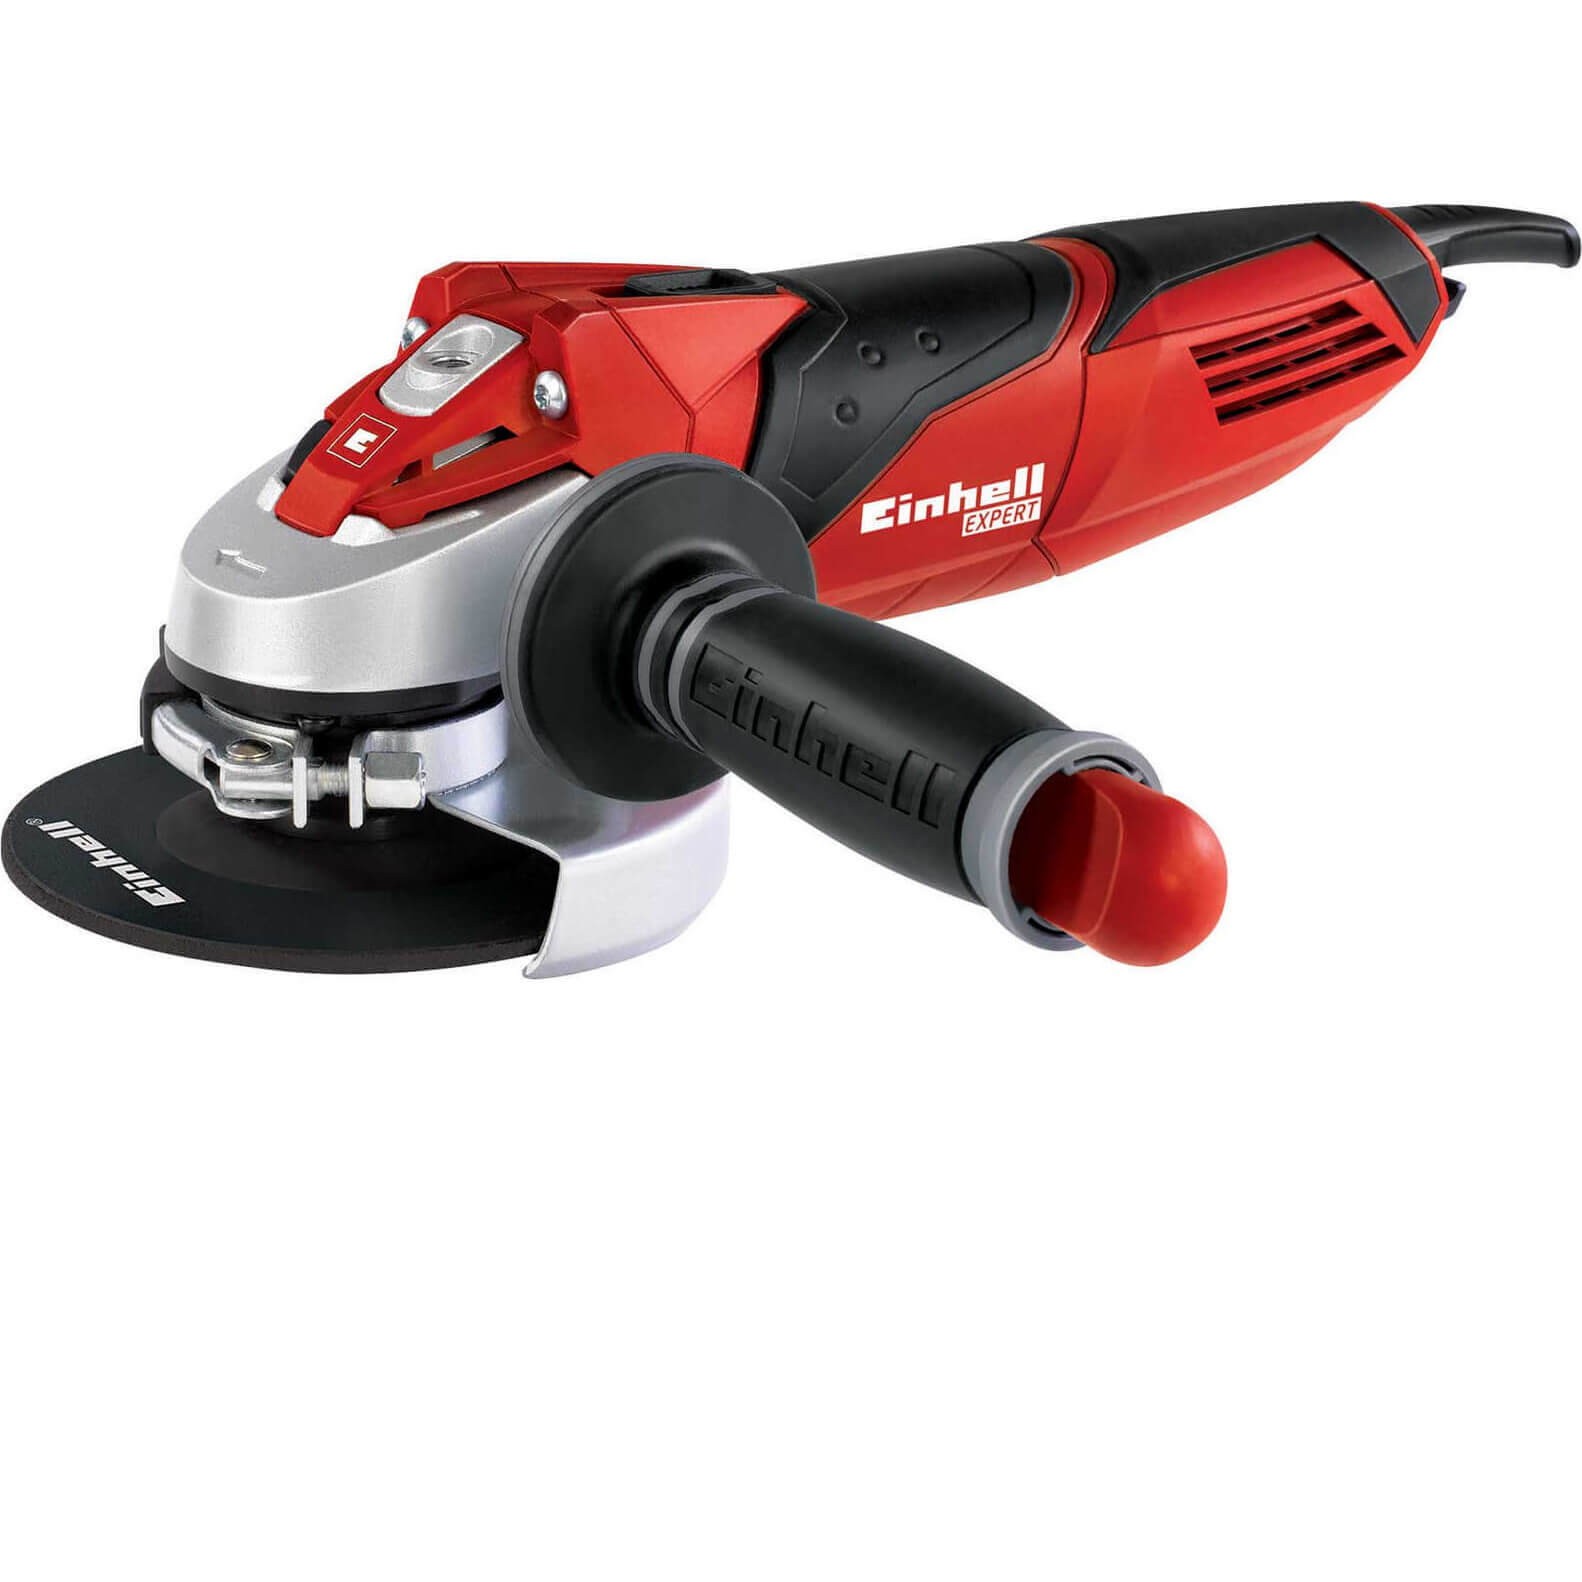 Photo of Einhell Te-ag 115 Angle Grinder 115mm